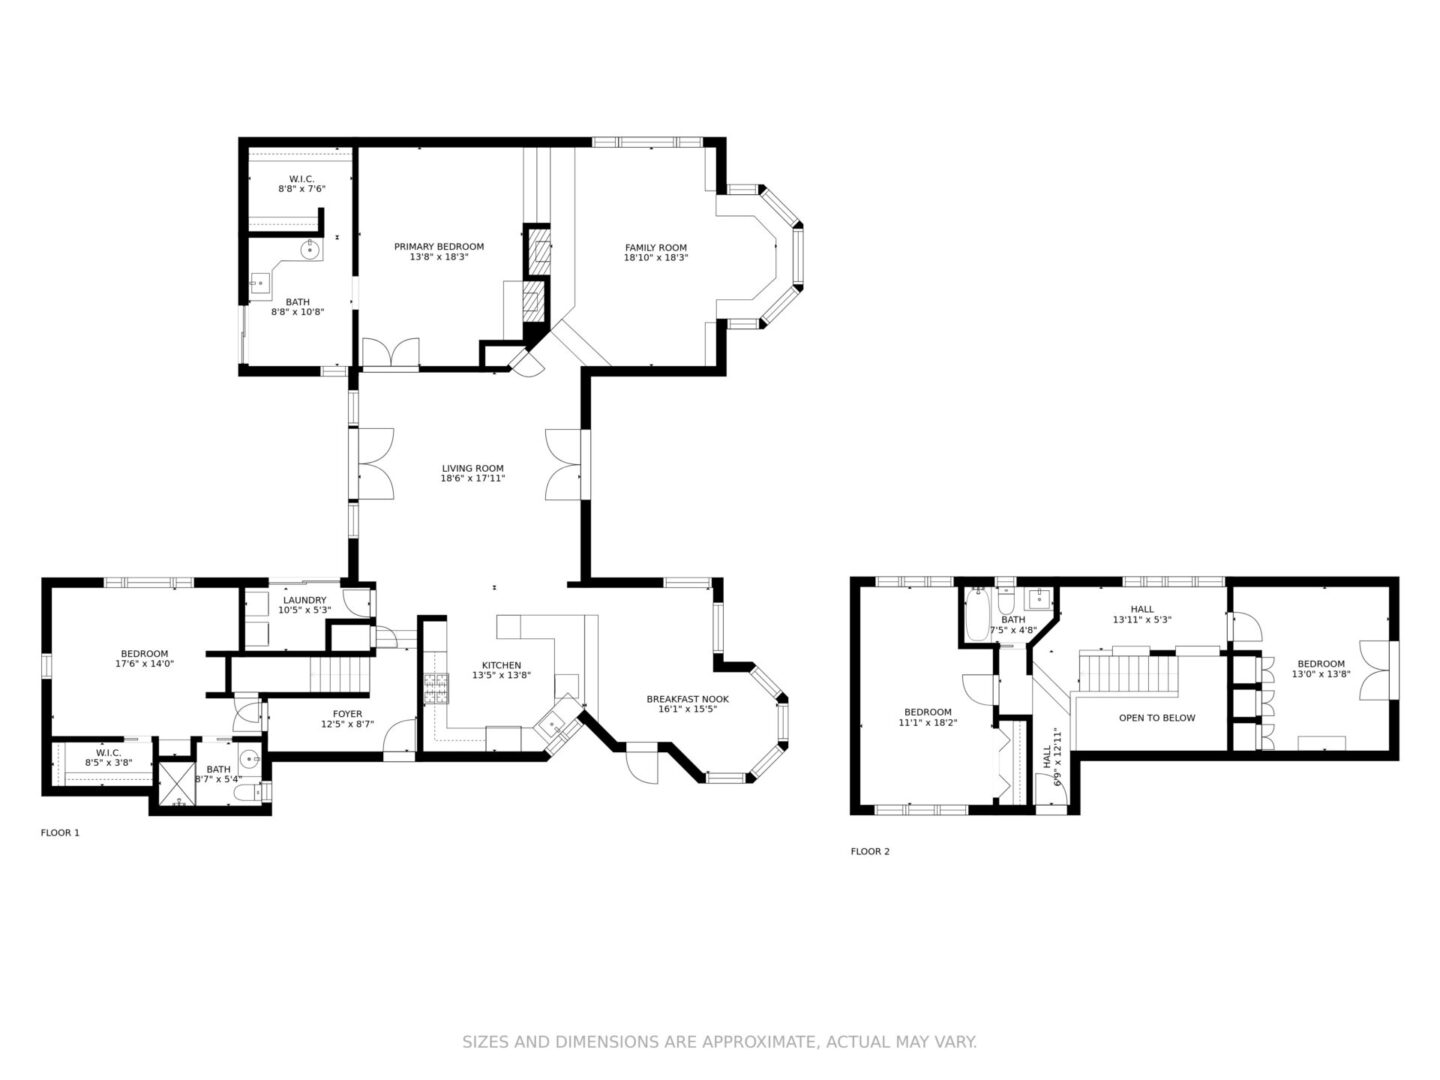 A floor plan of a house with two floors.